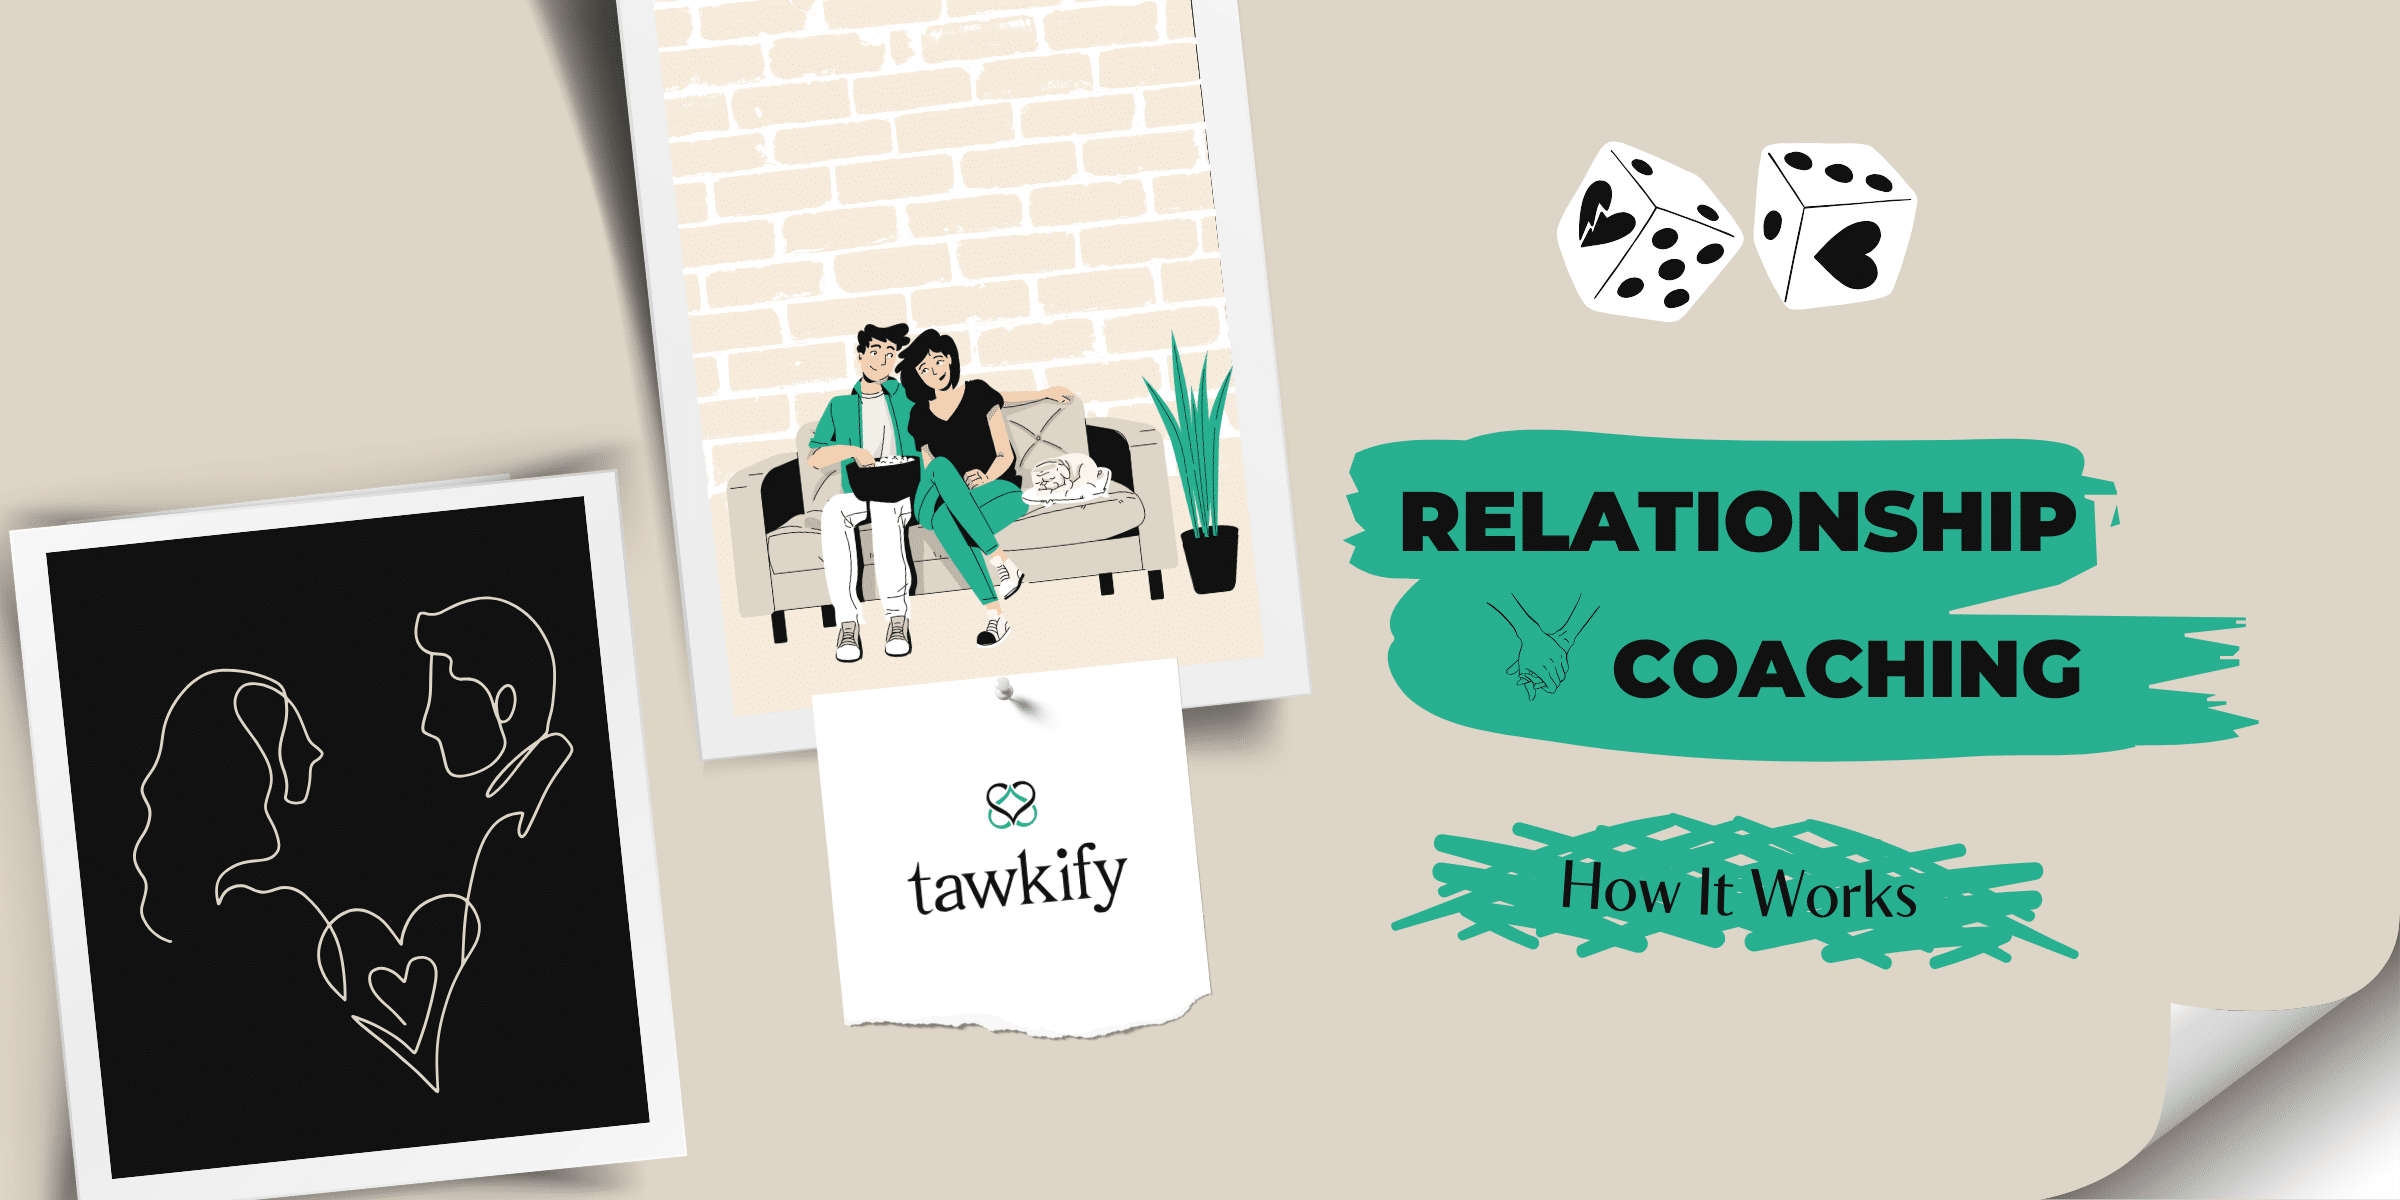 Ready to get on the road to a healthy relationship? Learn the benefits of relationship coaching, what it is, and how to get the most out of it.